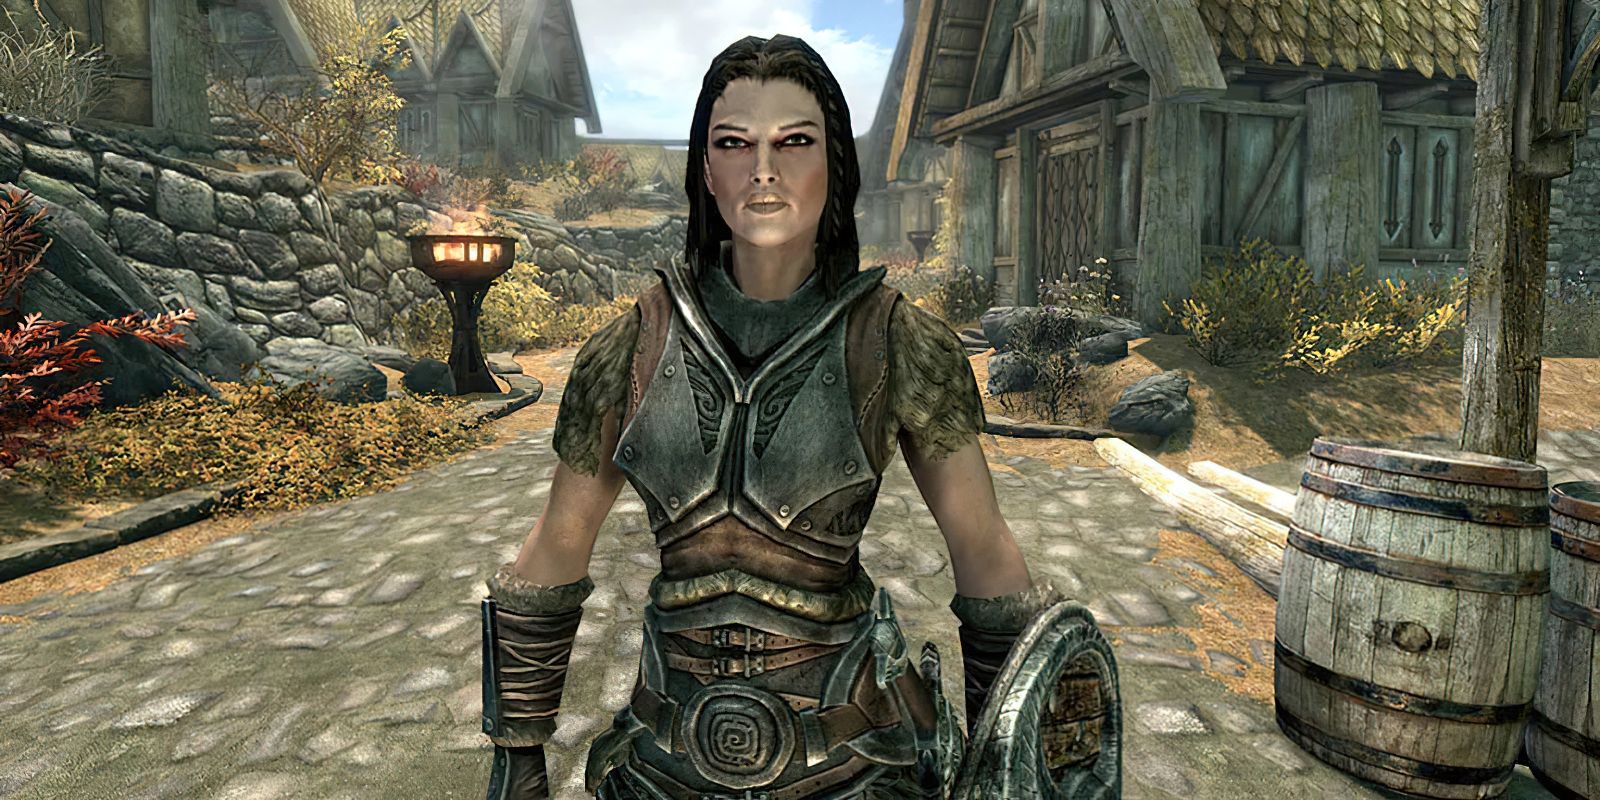 All Pros Cons Of Turning Lydia Into A Vampire In Skyrim